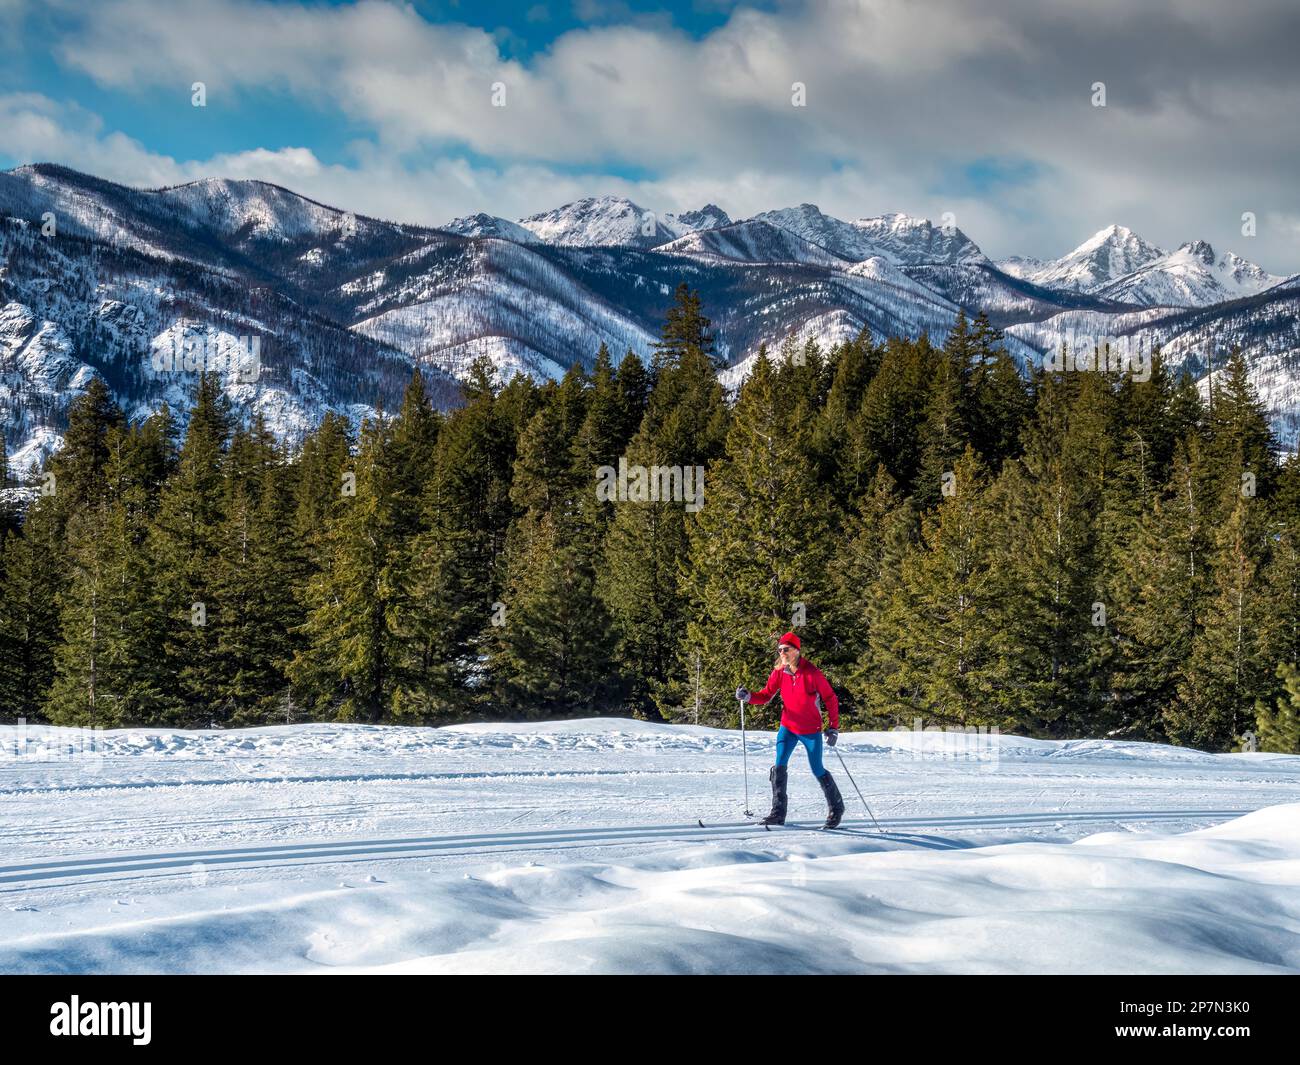 WA23234-00...WASHINGTON - Skier ascending the Lower Fawn Creek cross-country ski trail in the Rendezvous Trail system of the Methow Valley with the mo Stock Photo